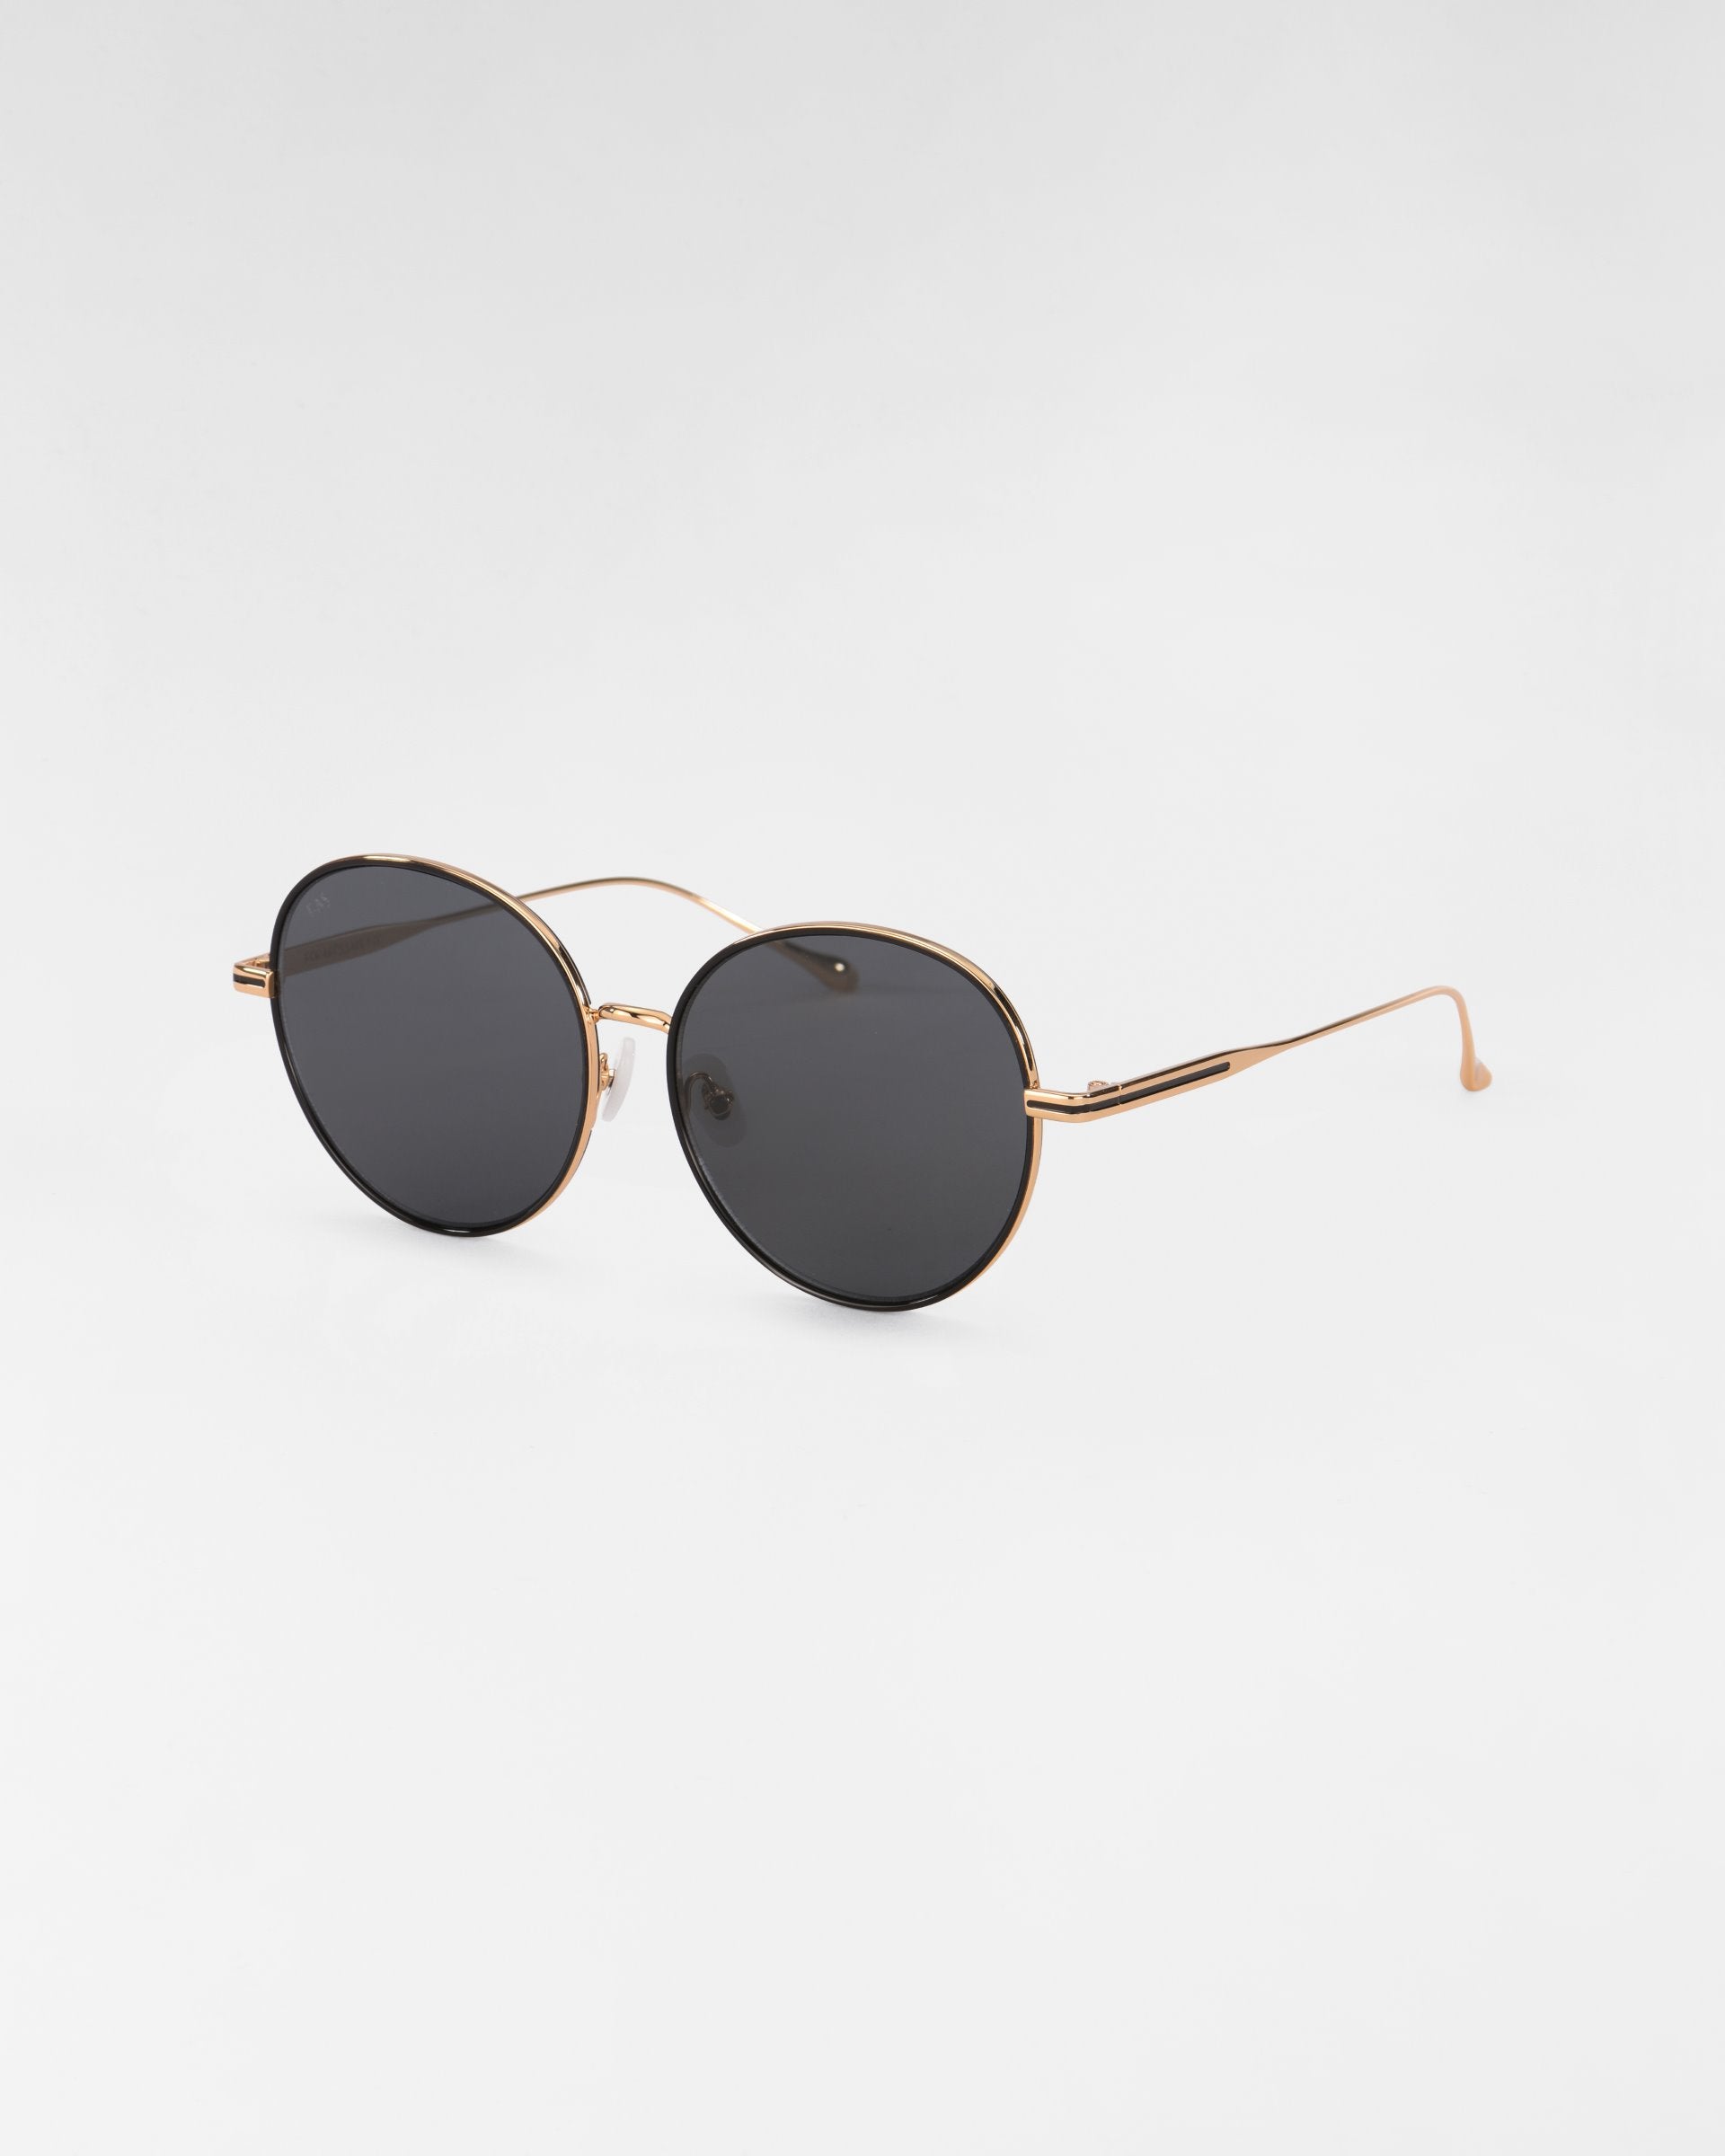 A pair of round Lemon sunglasses from For Art's Sake® with thin, 18-karat gold-plated frames and dark lenses set against a white background. The temples are slender and slightly curved at the ends, adding a touch of elegance.